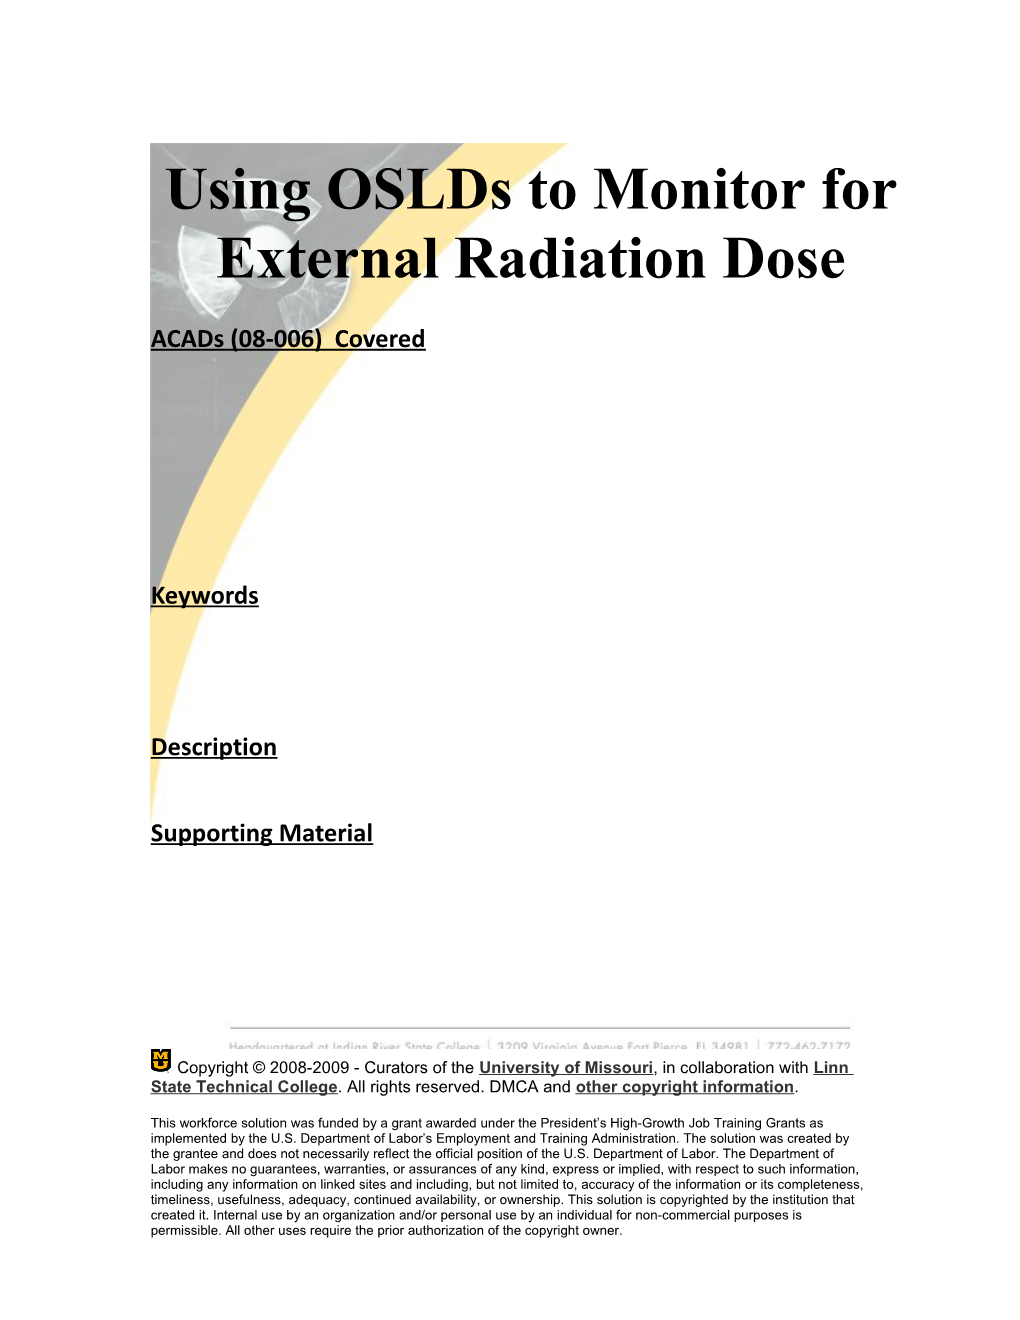 Module 1: Using Oslds to Monitor for External Radiation Dose